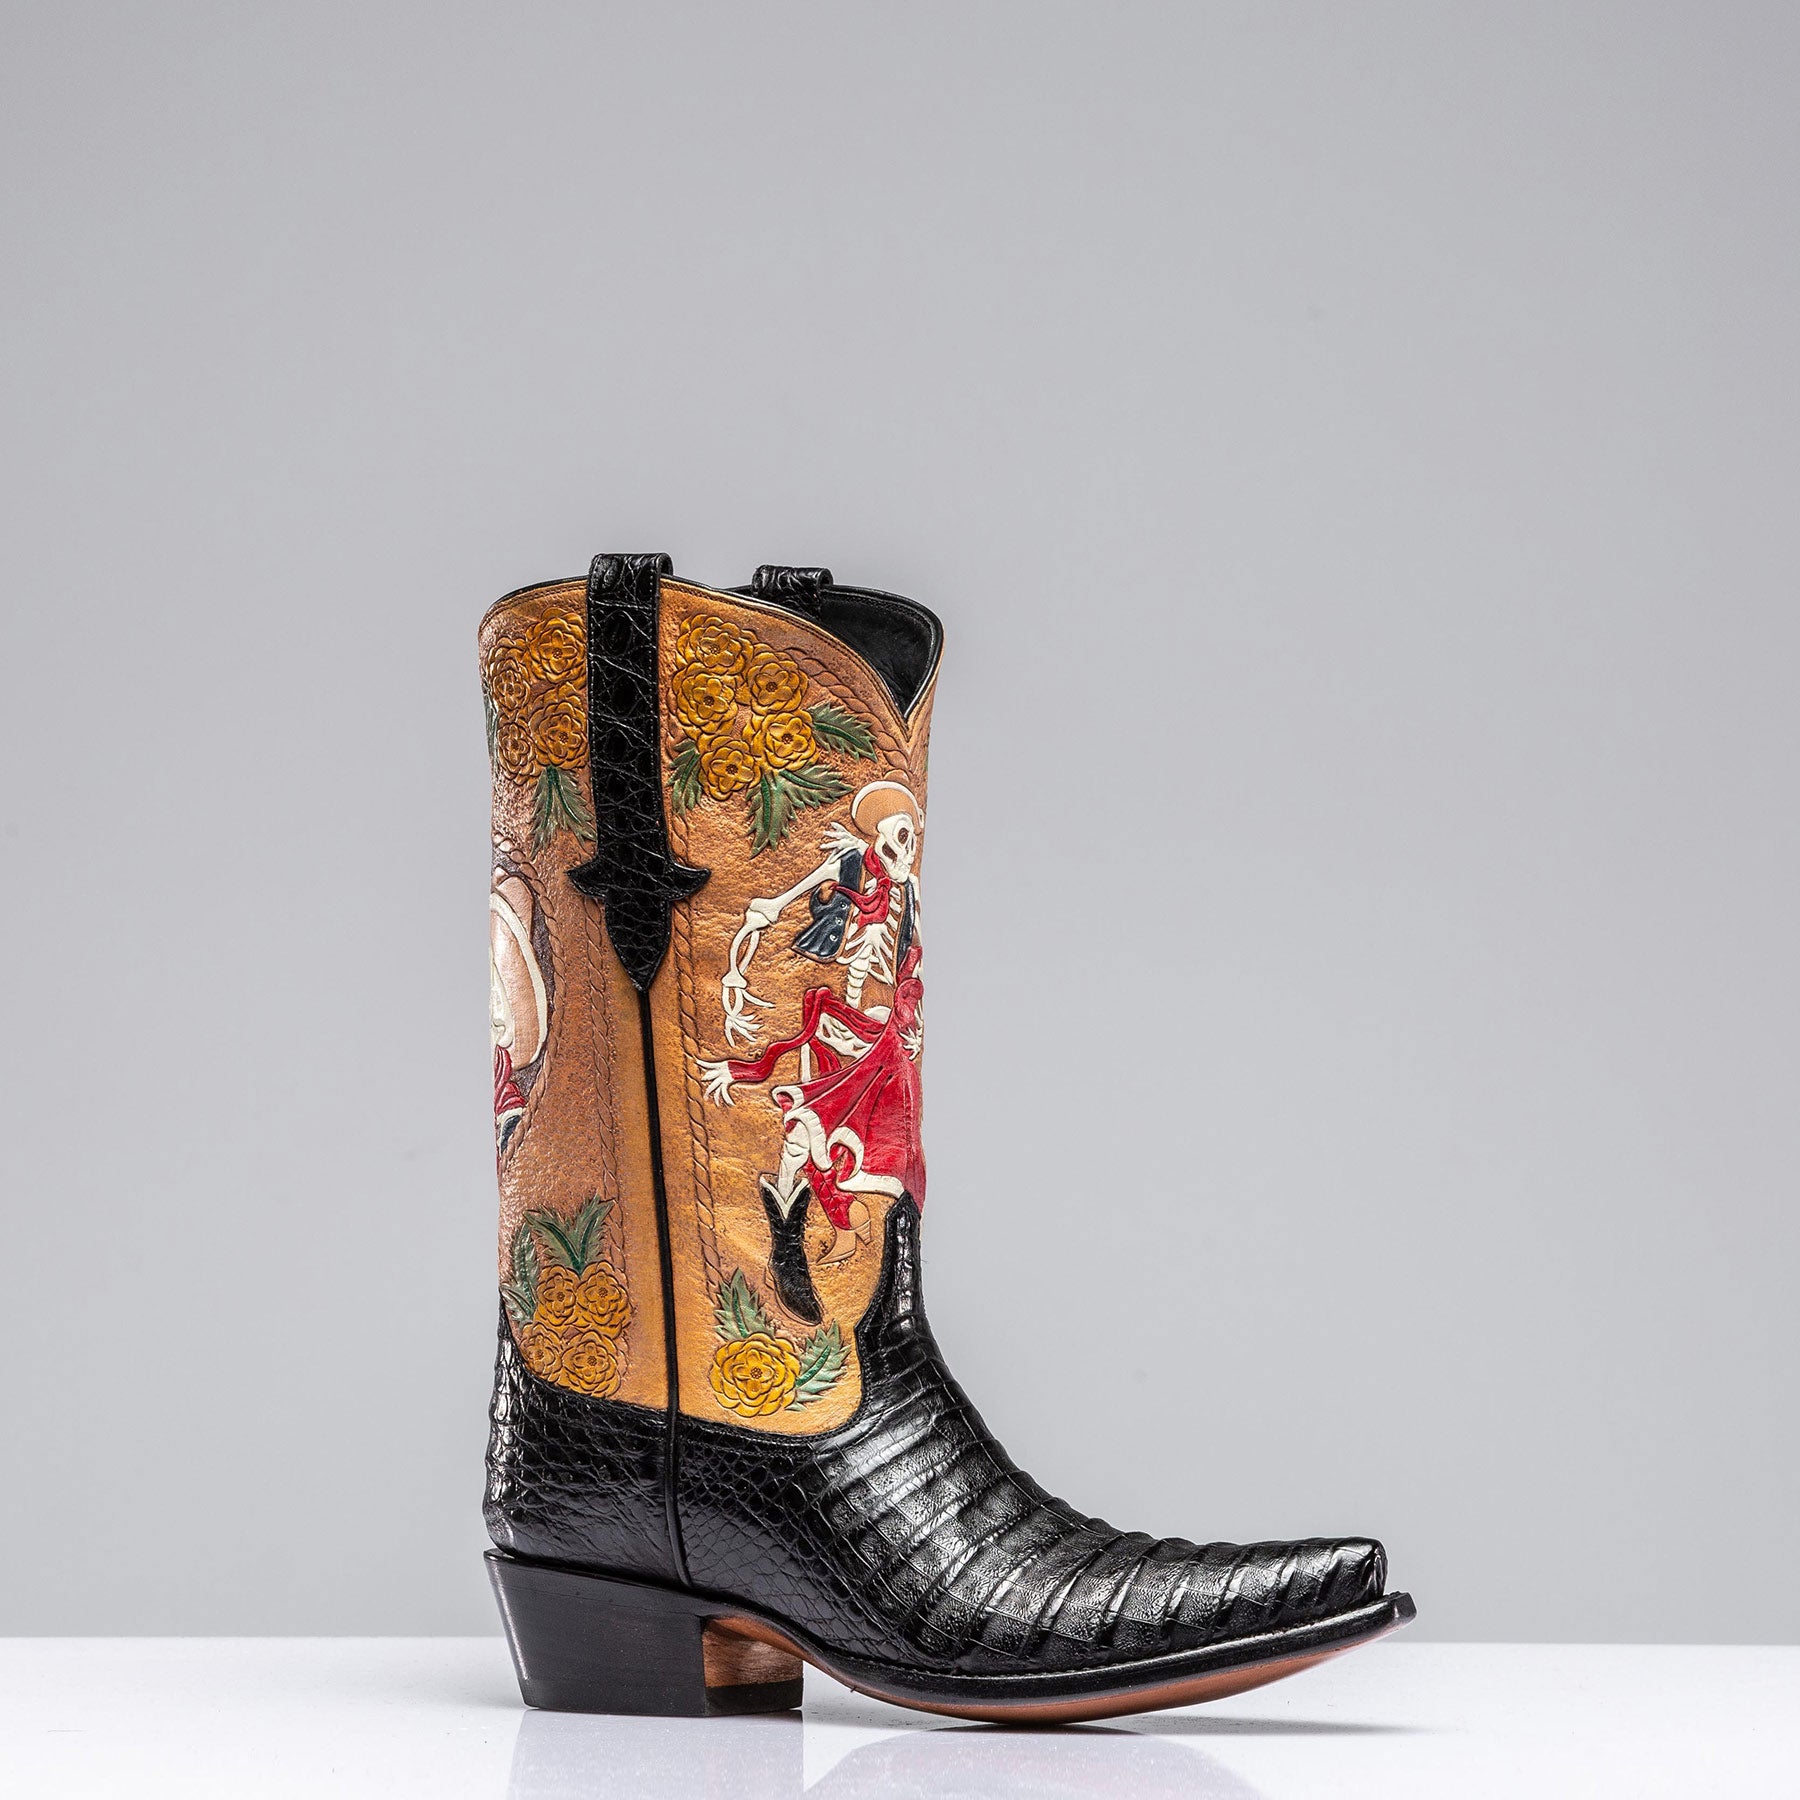 Dancing Skeleton Boots | Ladies - Cowboy Boots | Stallion Boots